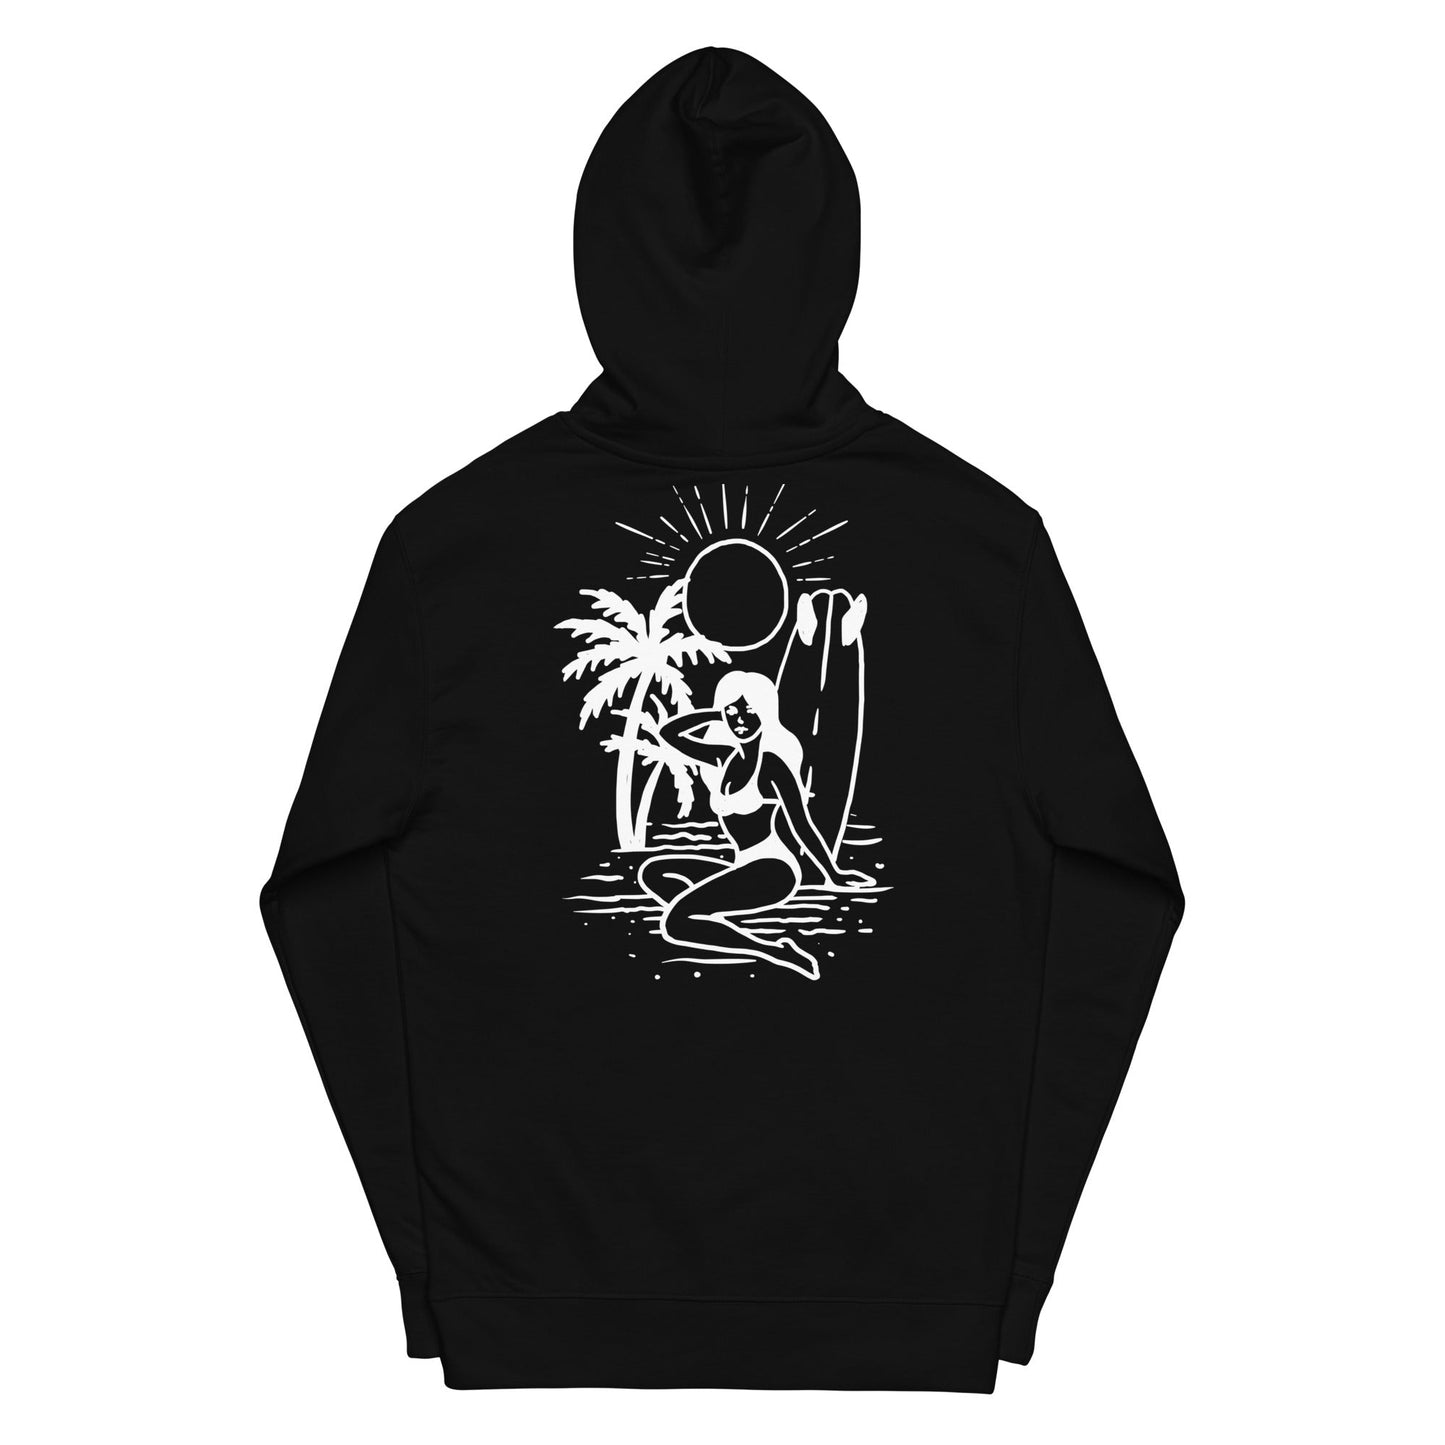 Surfer Girl 2 Hoodie (White on Pink) - The 124 Society